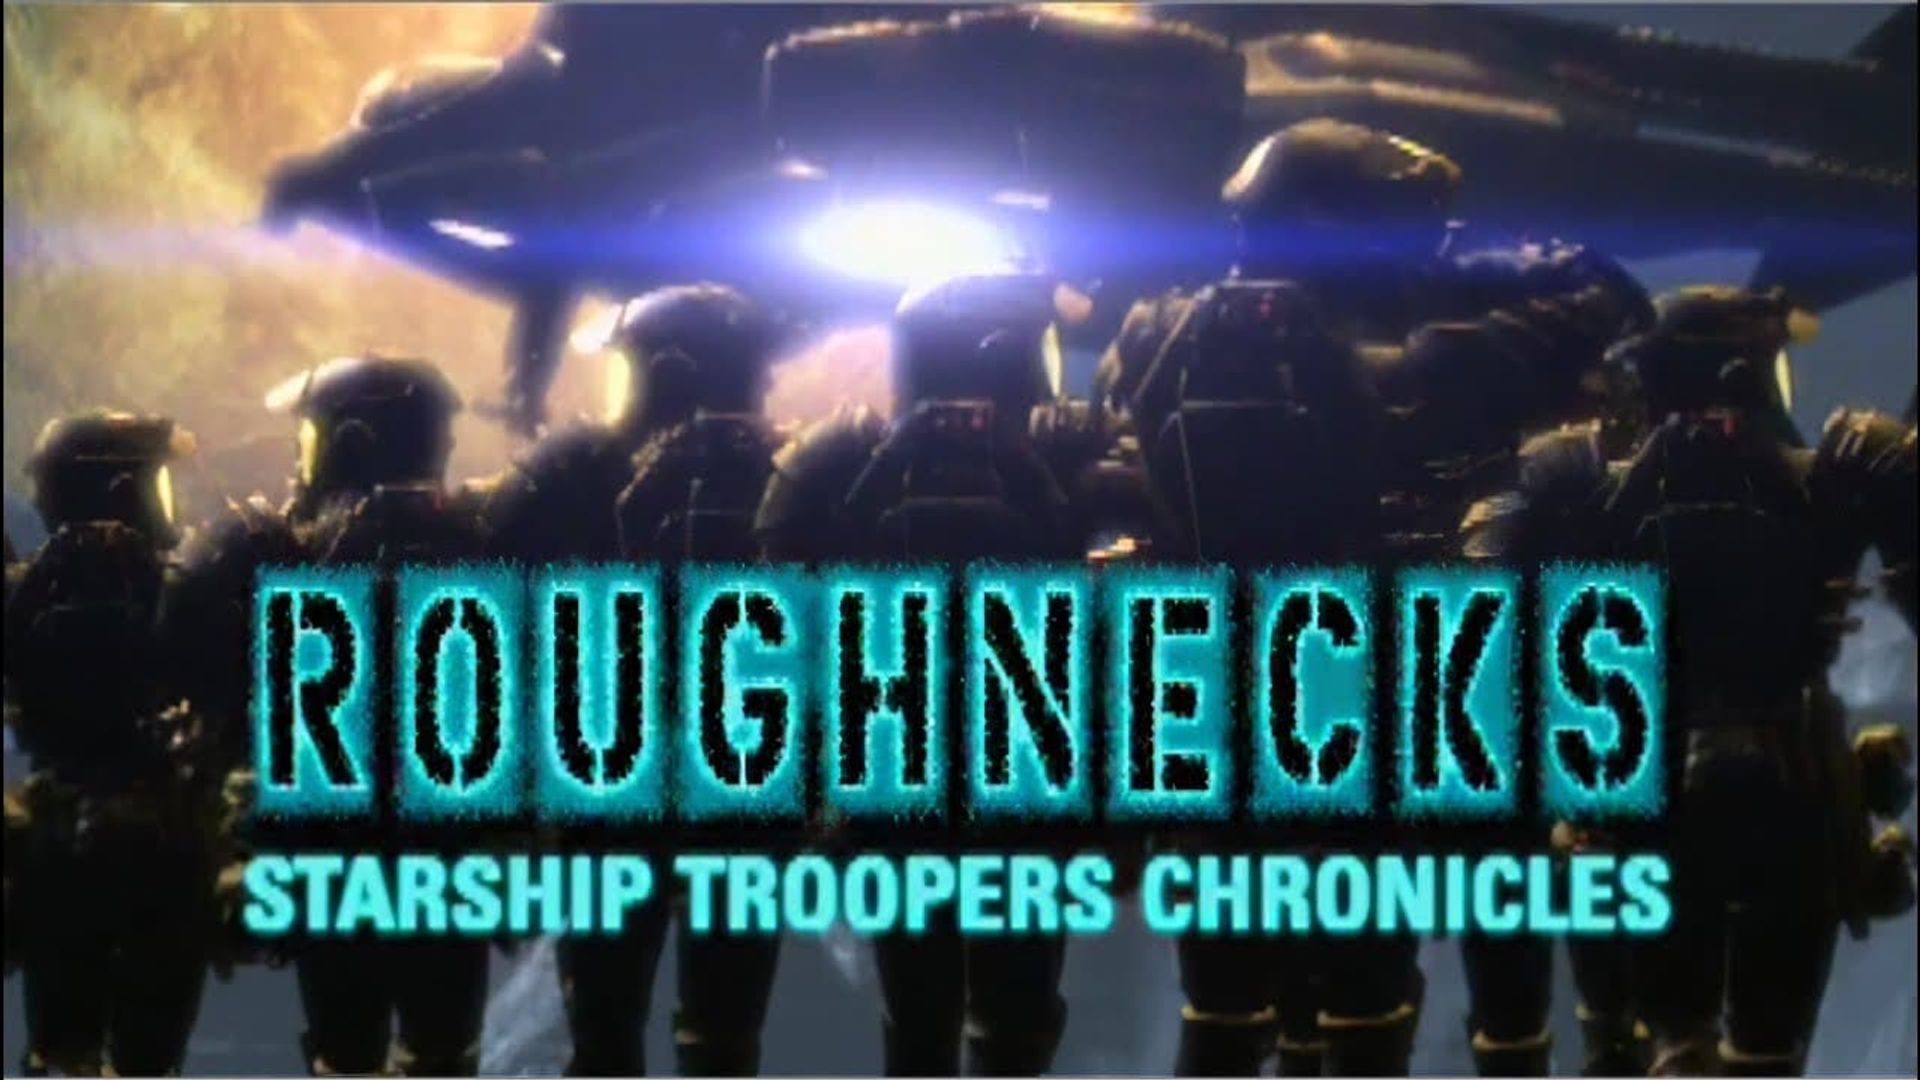 Roughnecks: The Starship Troopers Chronicles background